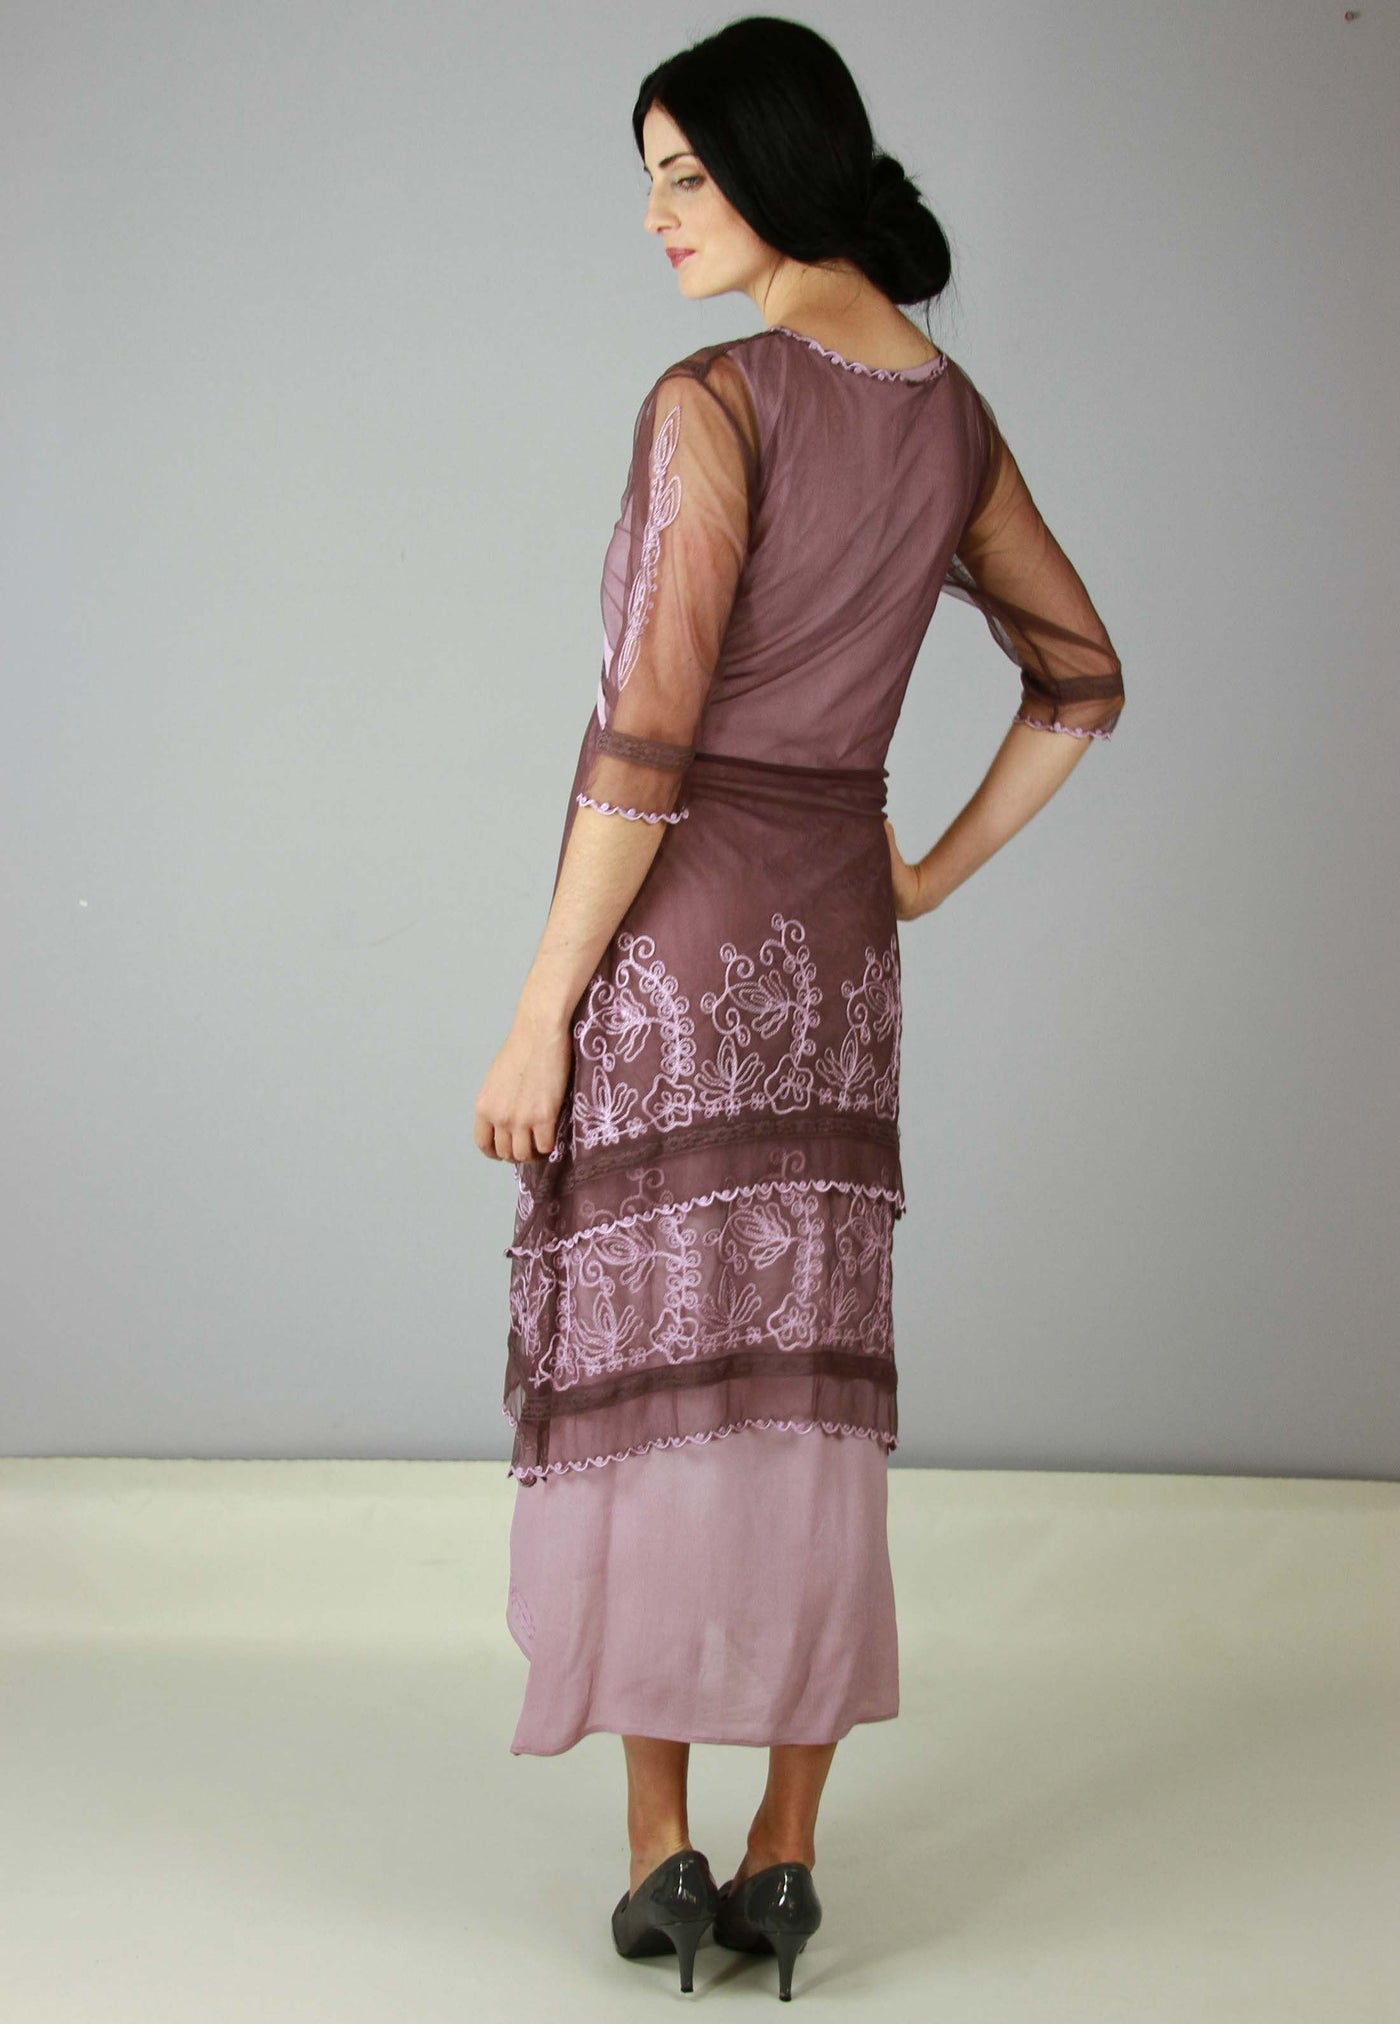 Vintage Titanic Tea Party Dress in Mauve by Nataya - SOLD OUT